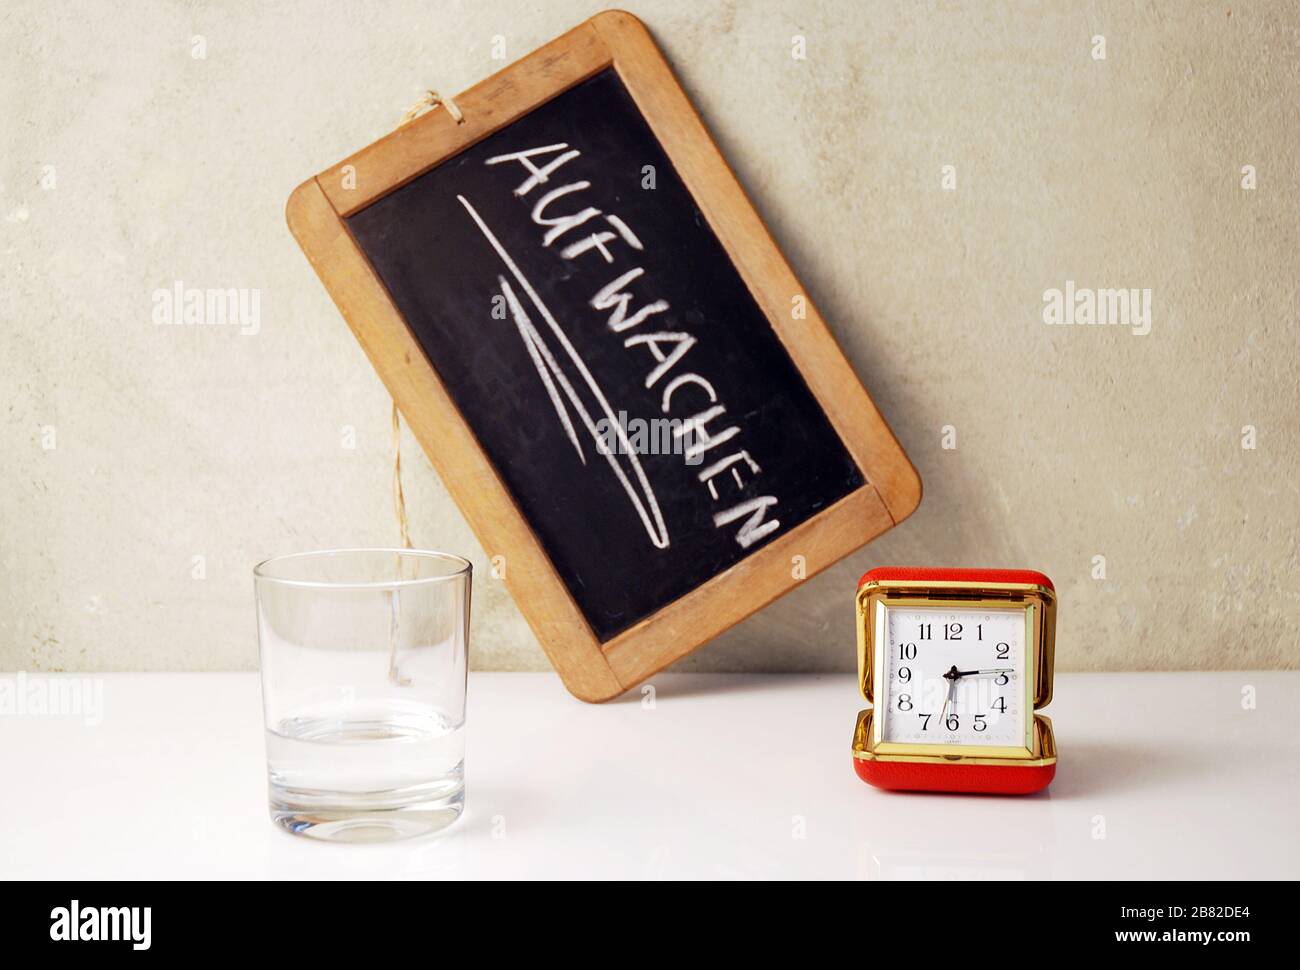 conceptual scene with a chalkboard, timer and water glas and the german text Aufwachen, translate wake up Stock Photo